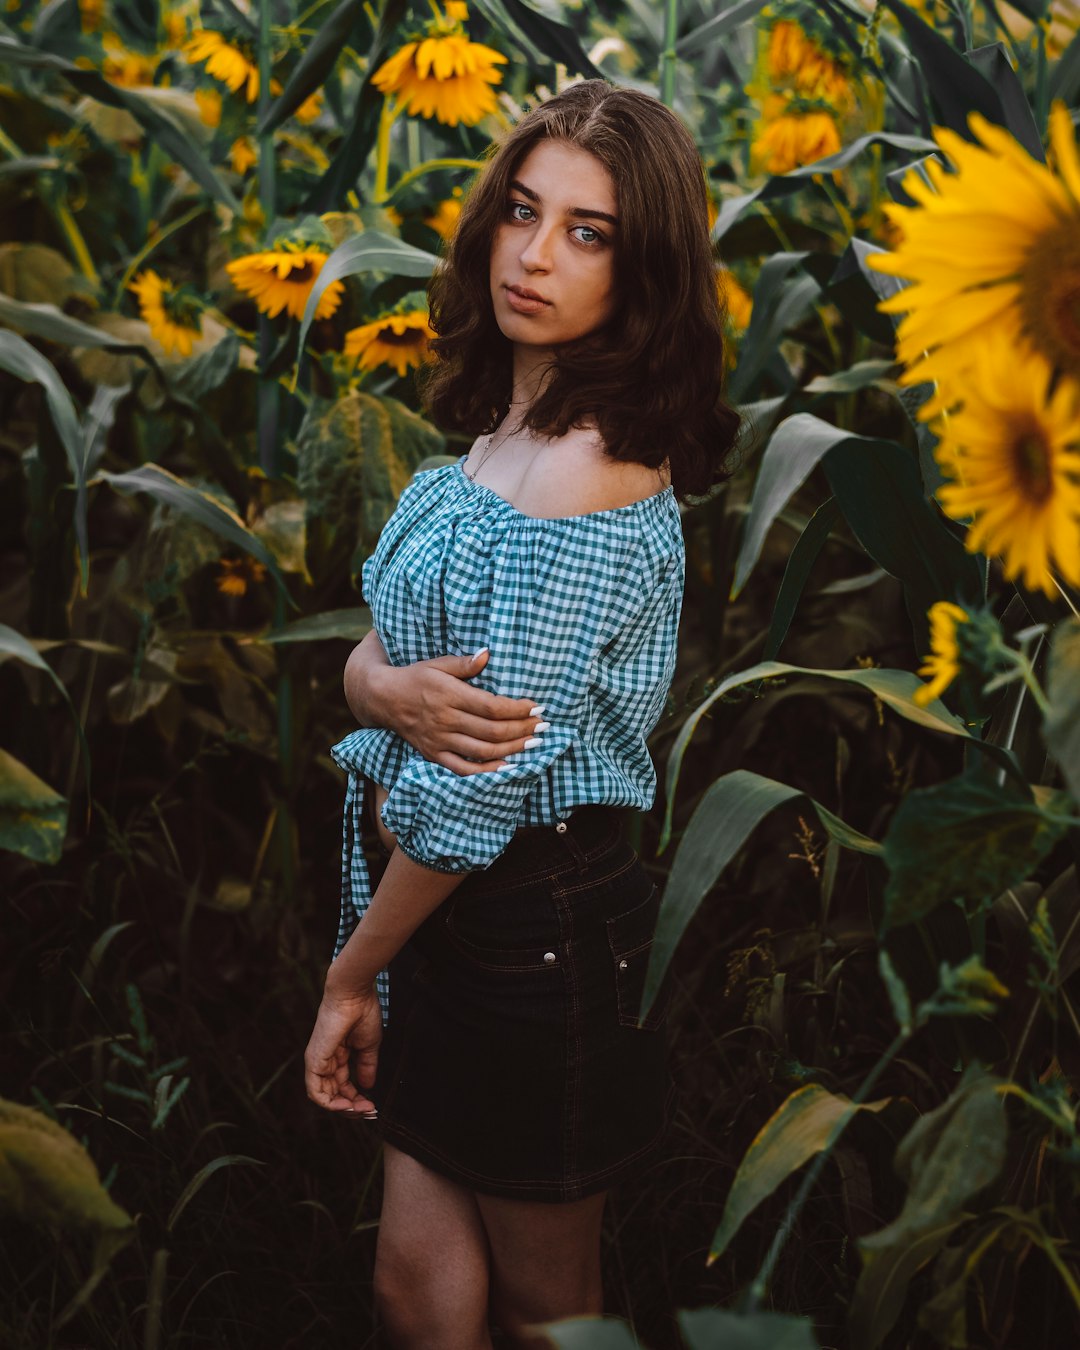 Gisou is one of my photography models that we decided to have a photography meeting together at a sunflower farm.